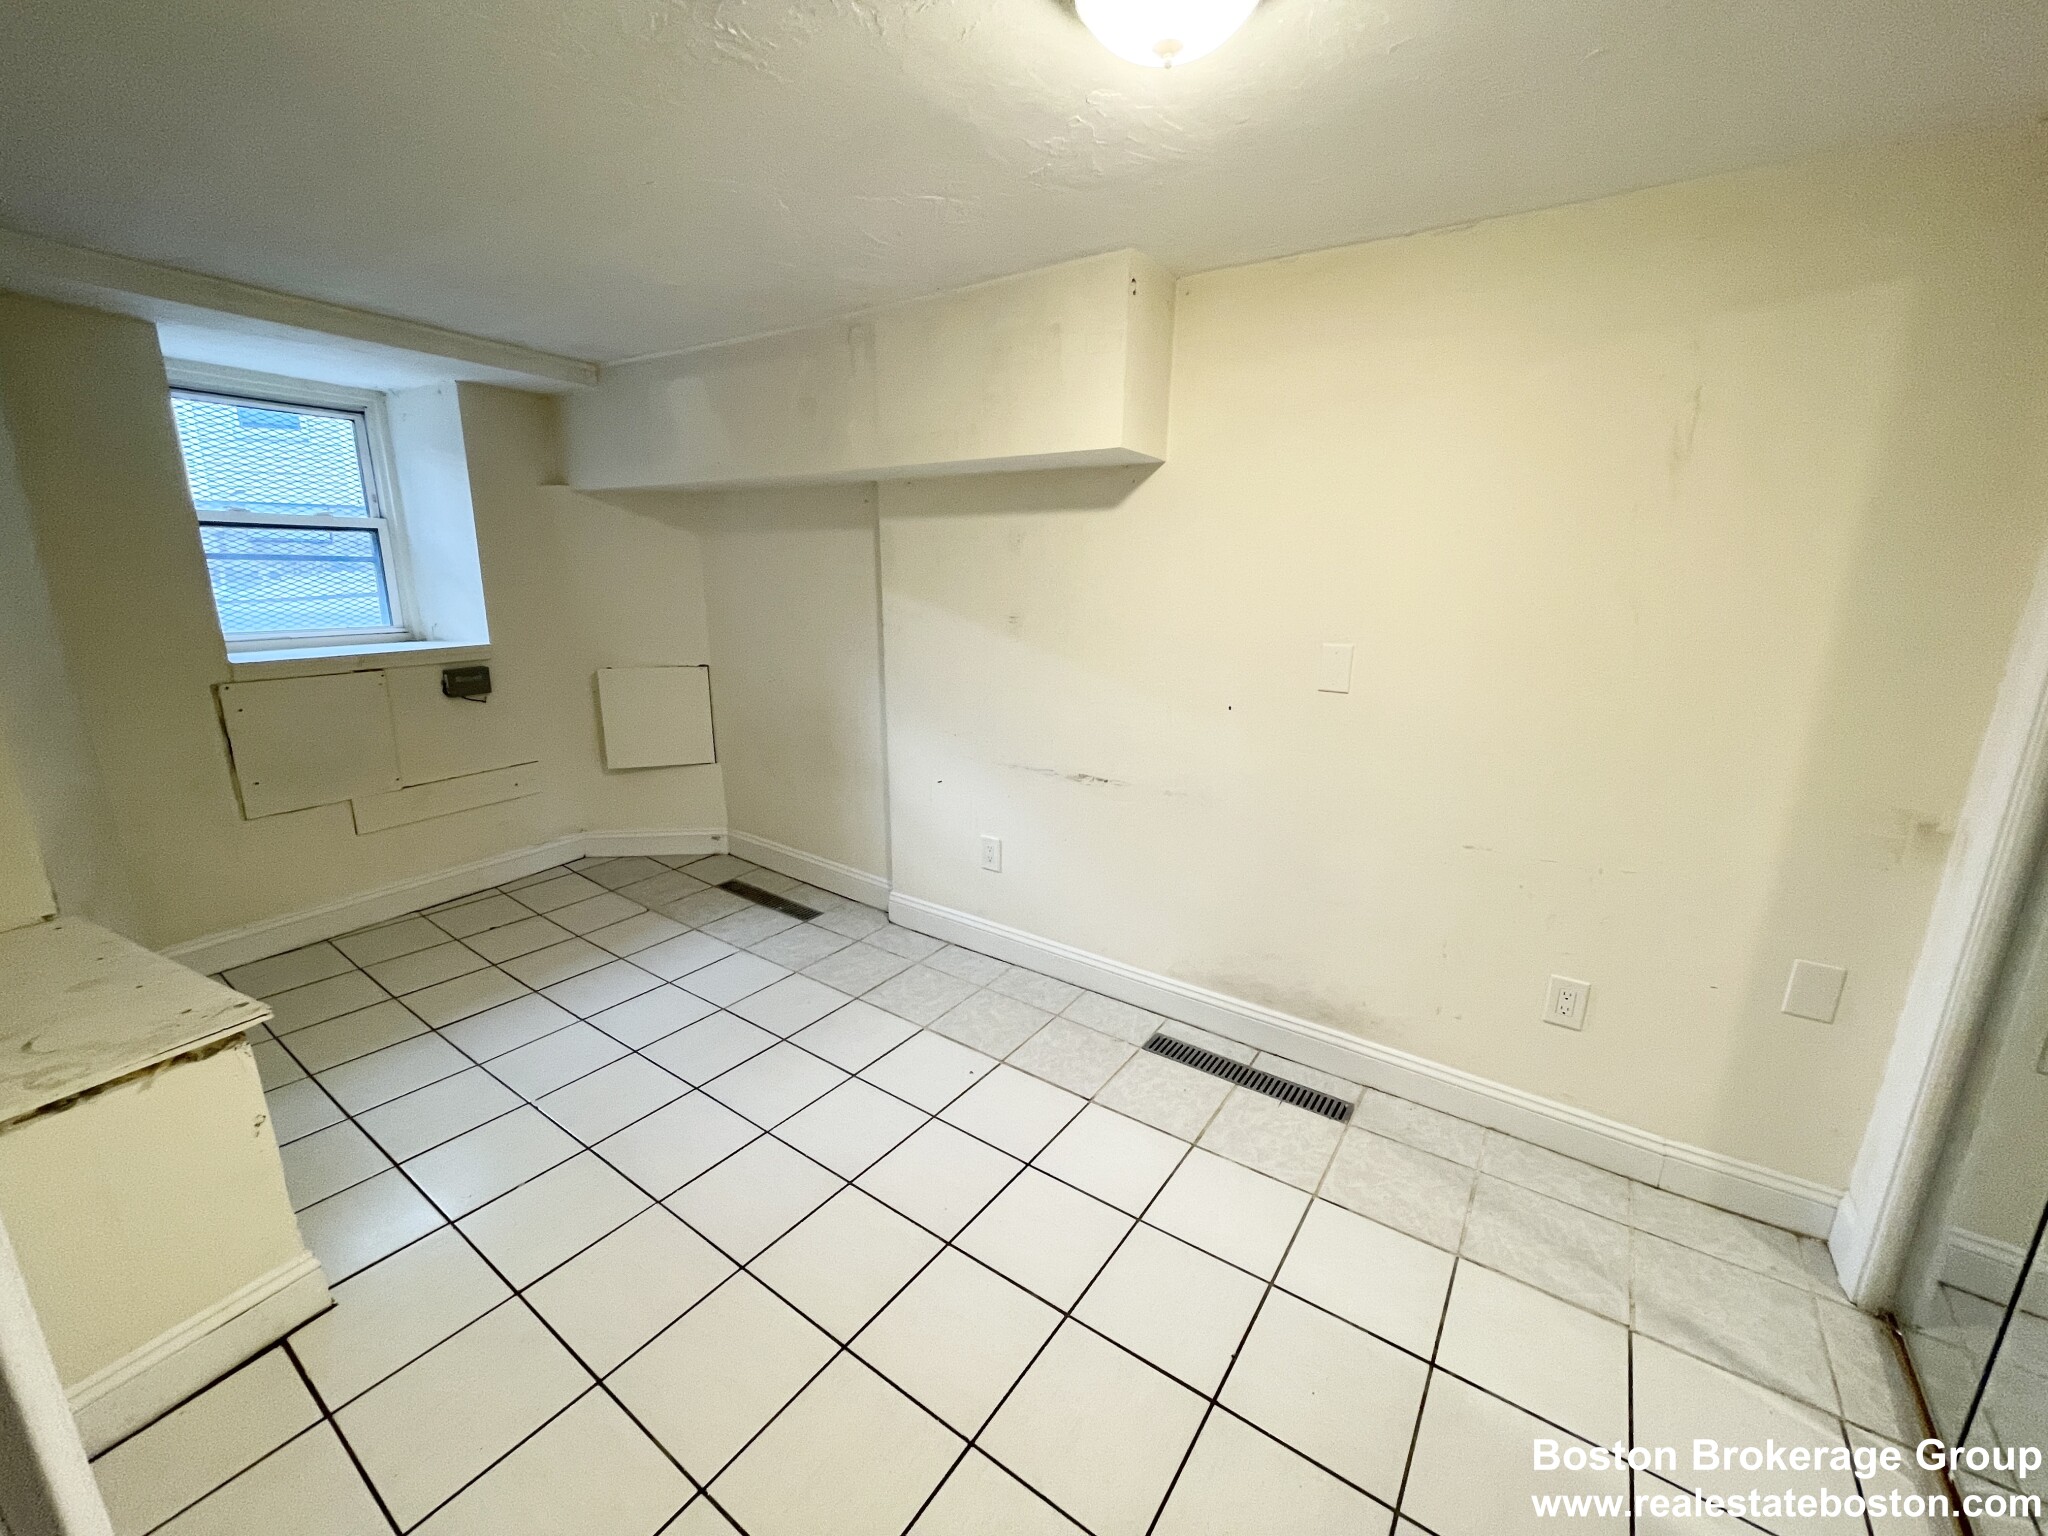 Photos of apartment on Parker St.,Boston MA 02120